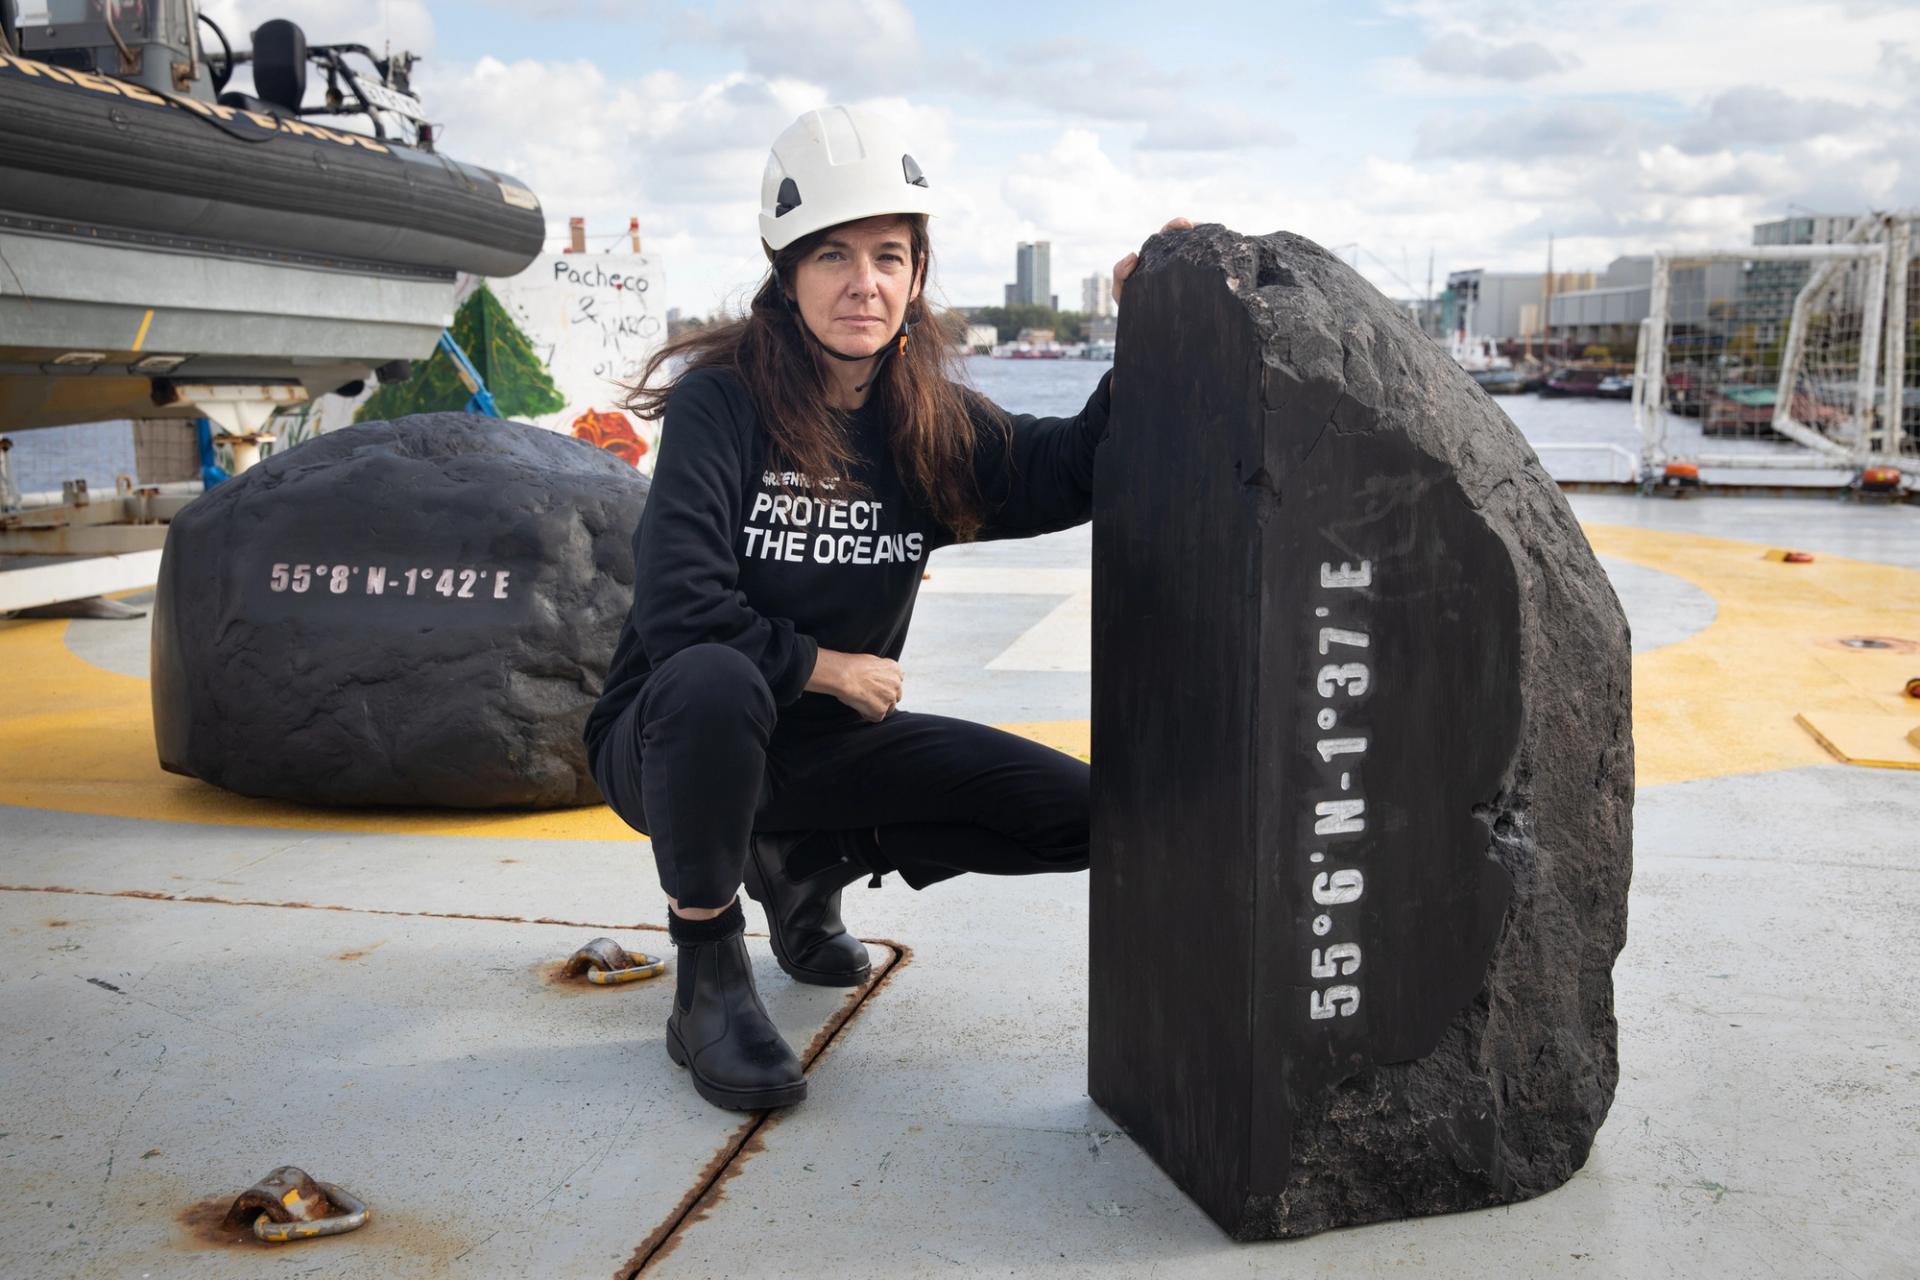 Fiona Banner poses with her sculptures Peanuts Full Stop (left) and Orator Full Stop while aboard the Greenpeace ship Esperanza, at Tower Bridge in London. © Suzanne Plunkett / Greenpeace